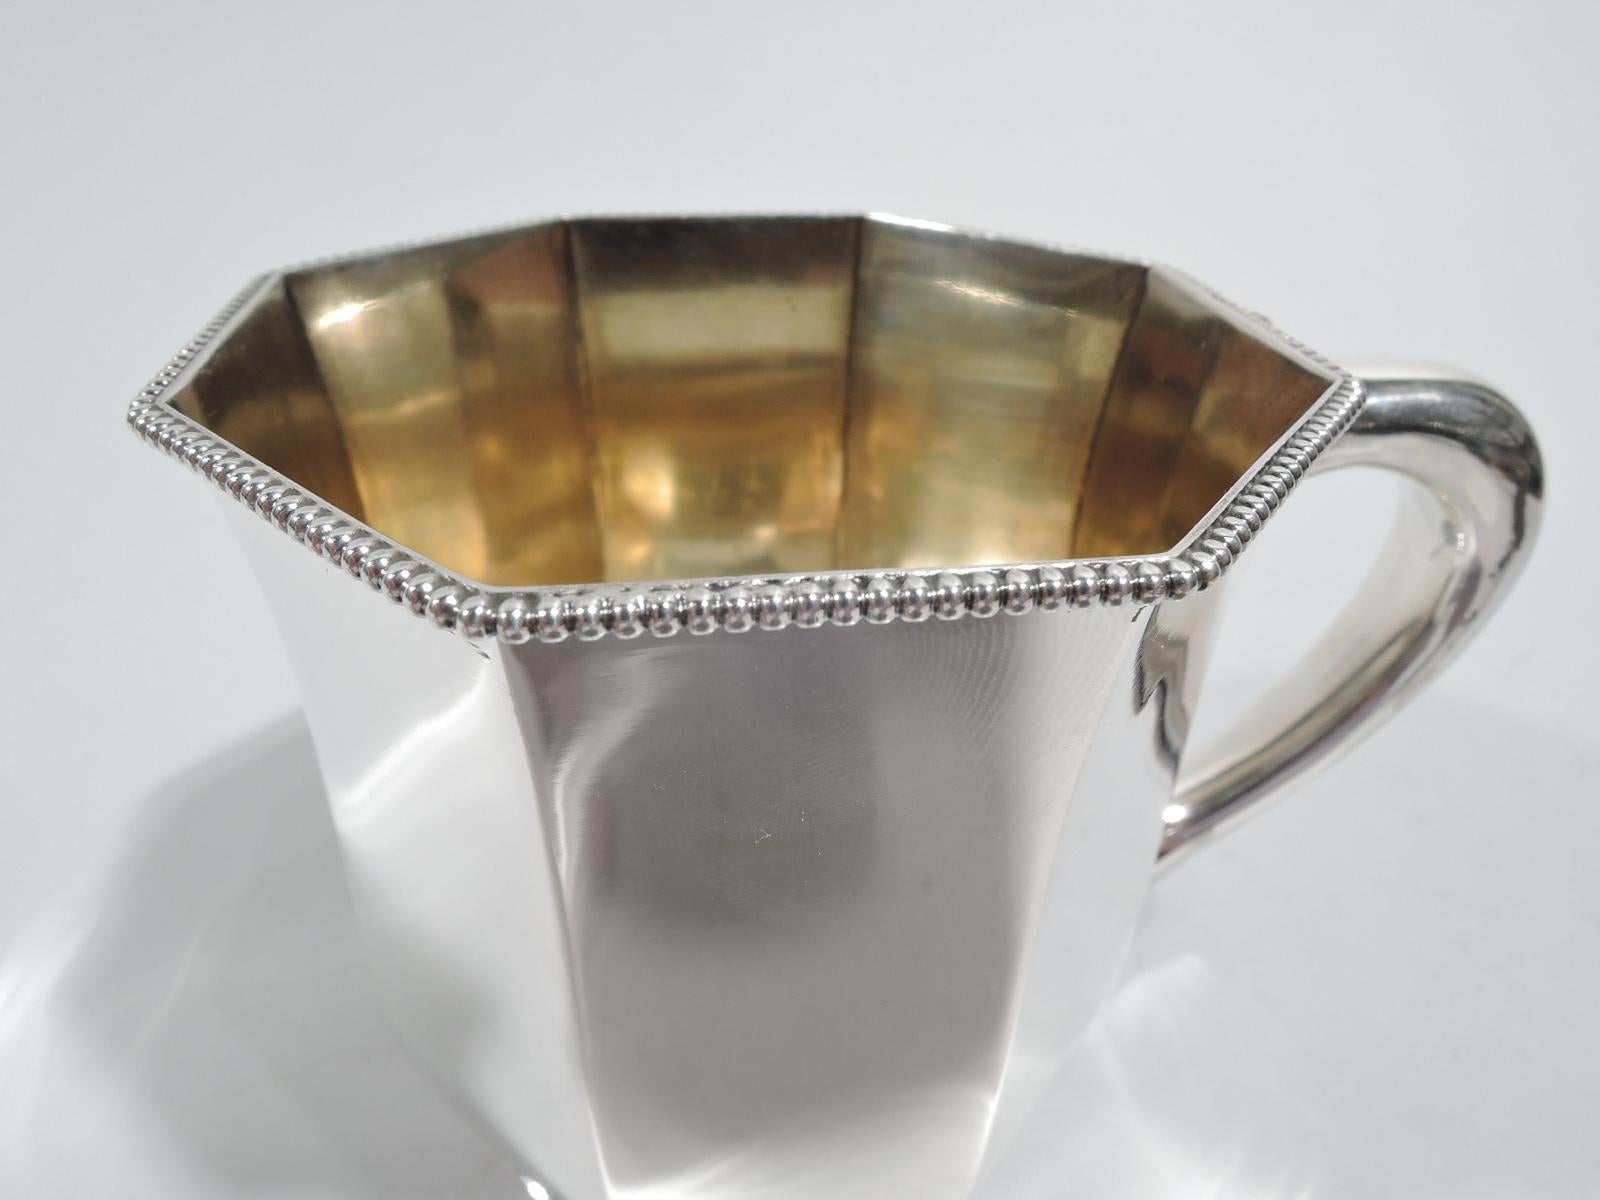 Late 19th Century Gorham American Edwardian Modern Sterling Silver Baby Cup